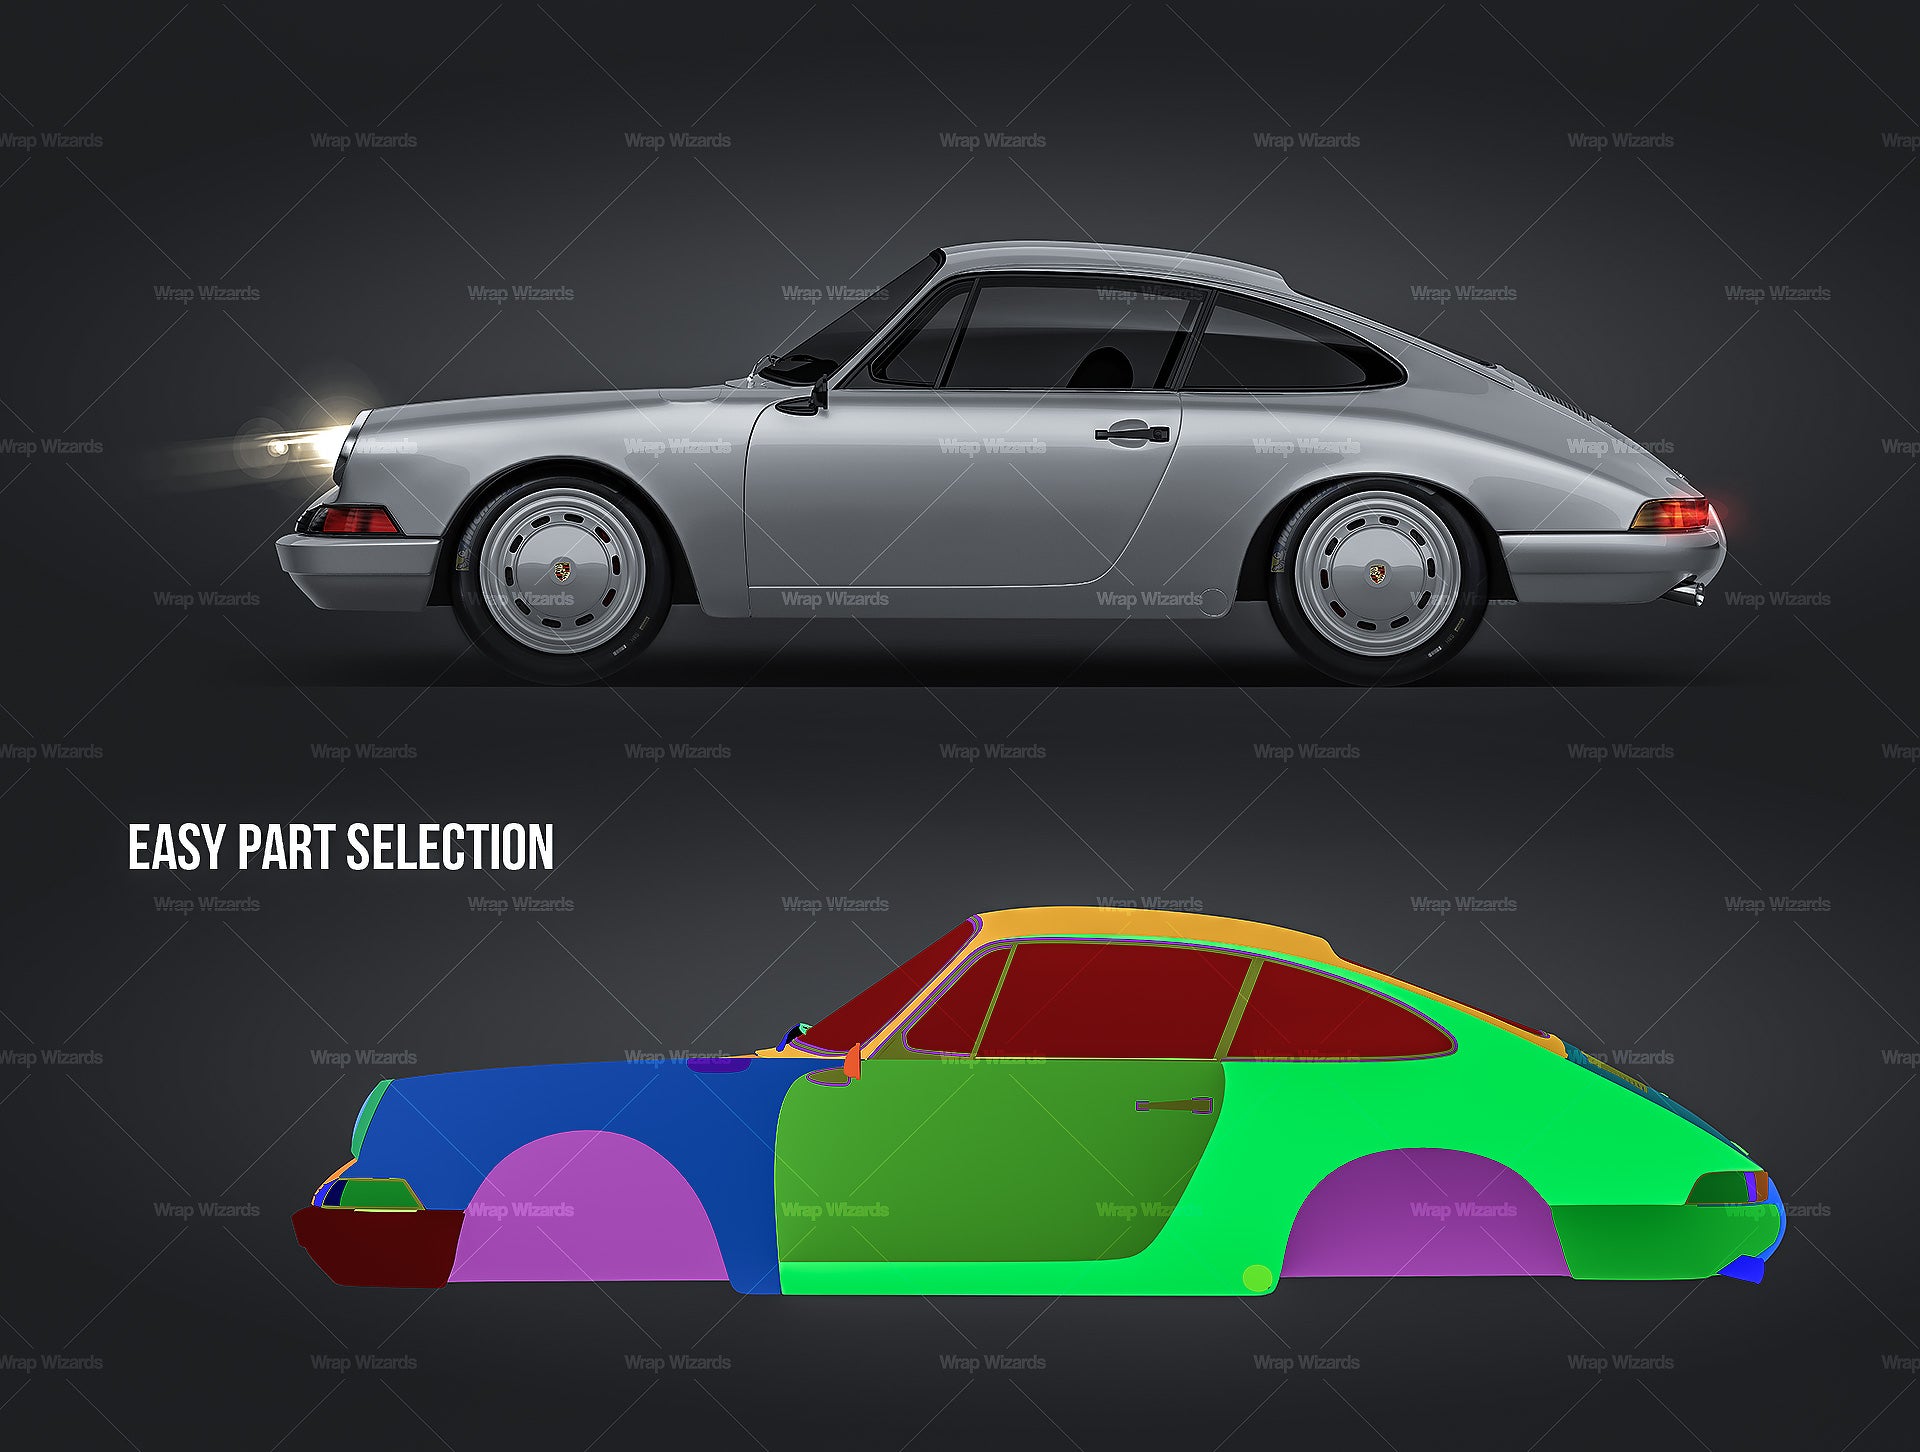 Porsche 911 R 1968 glossy finish - all sides Car Mockup Template.psd